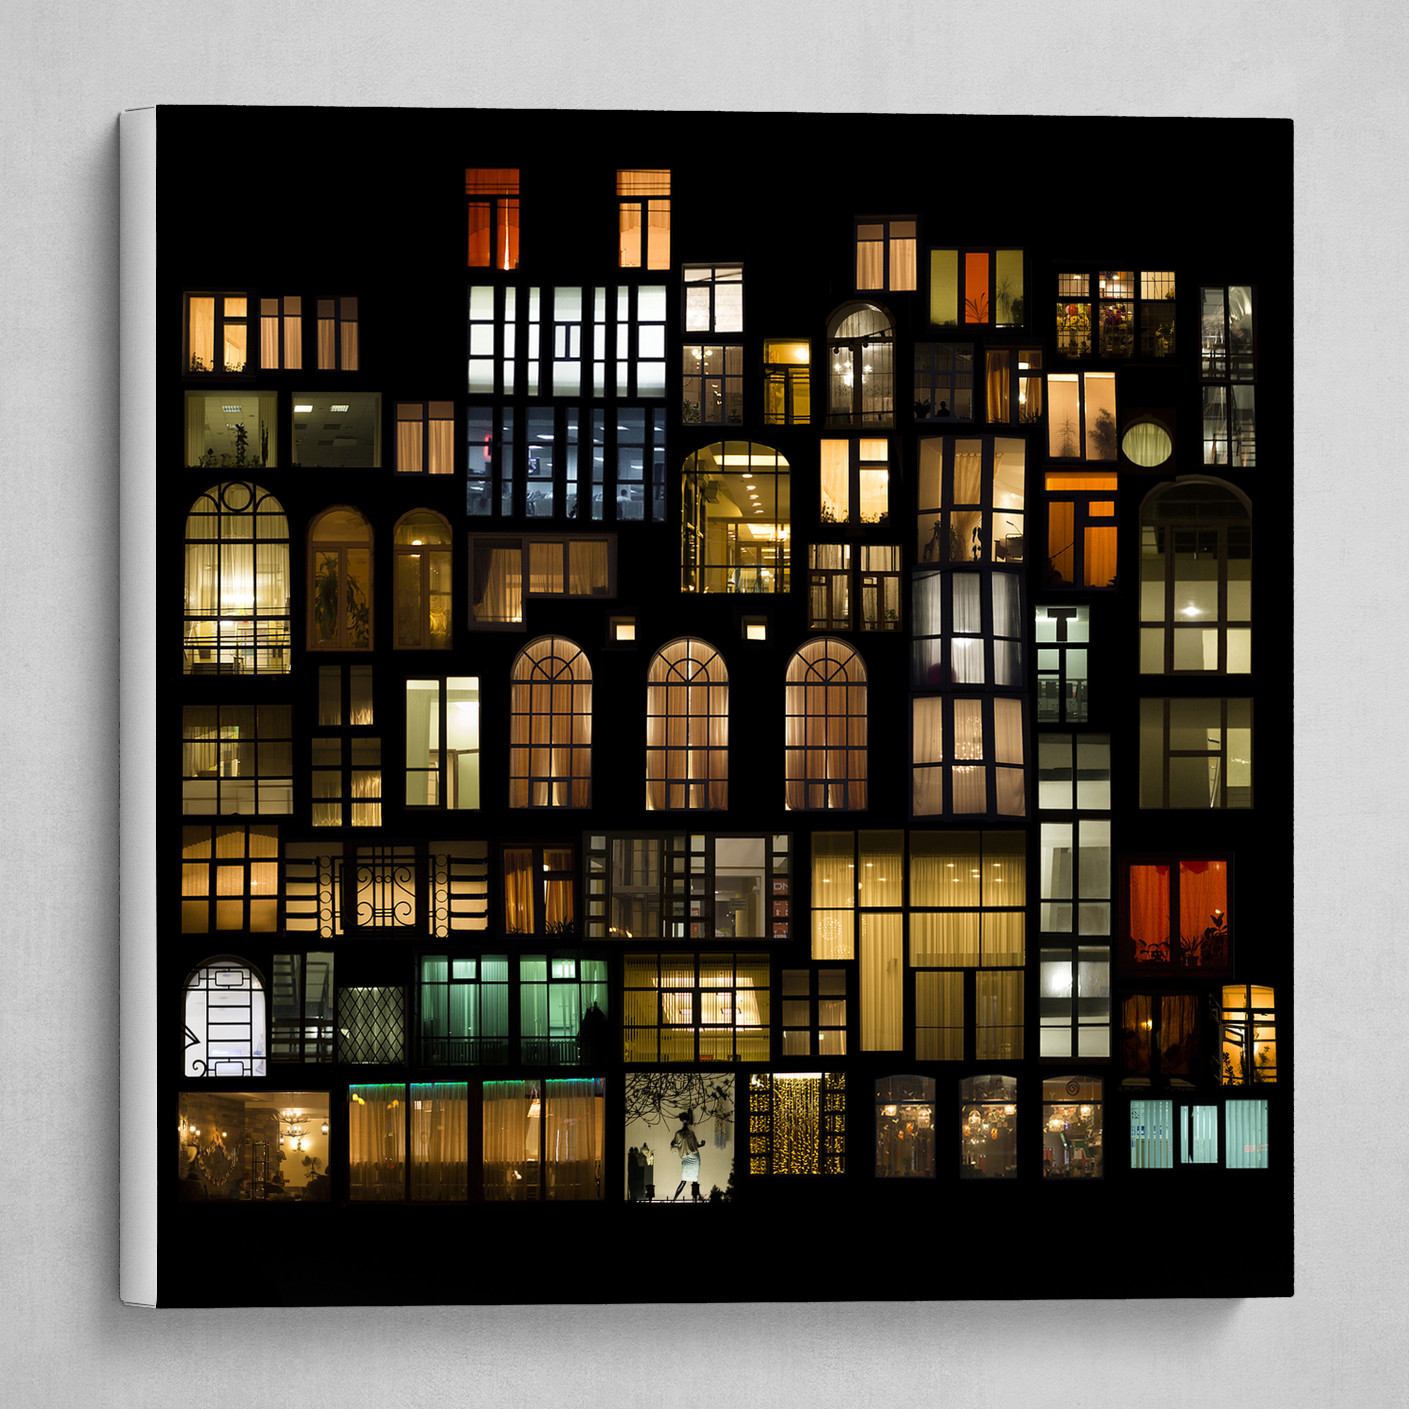 A collage of Windows